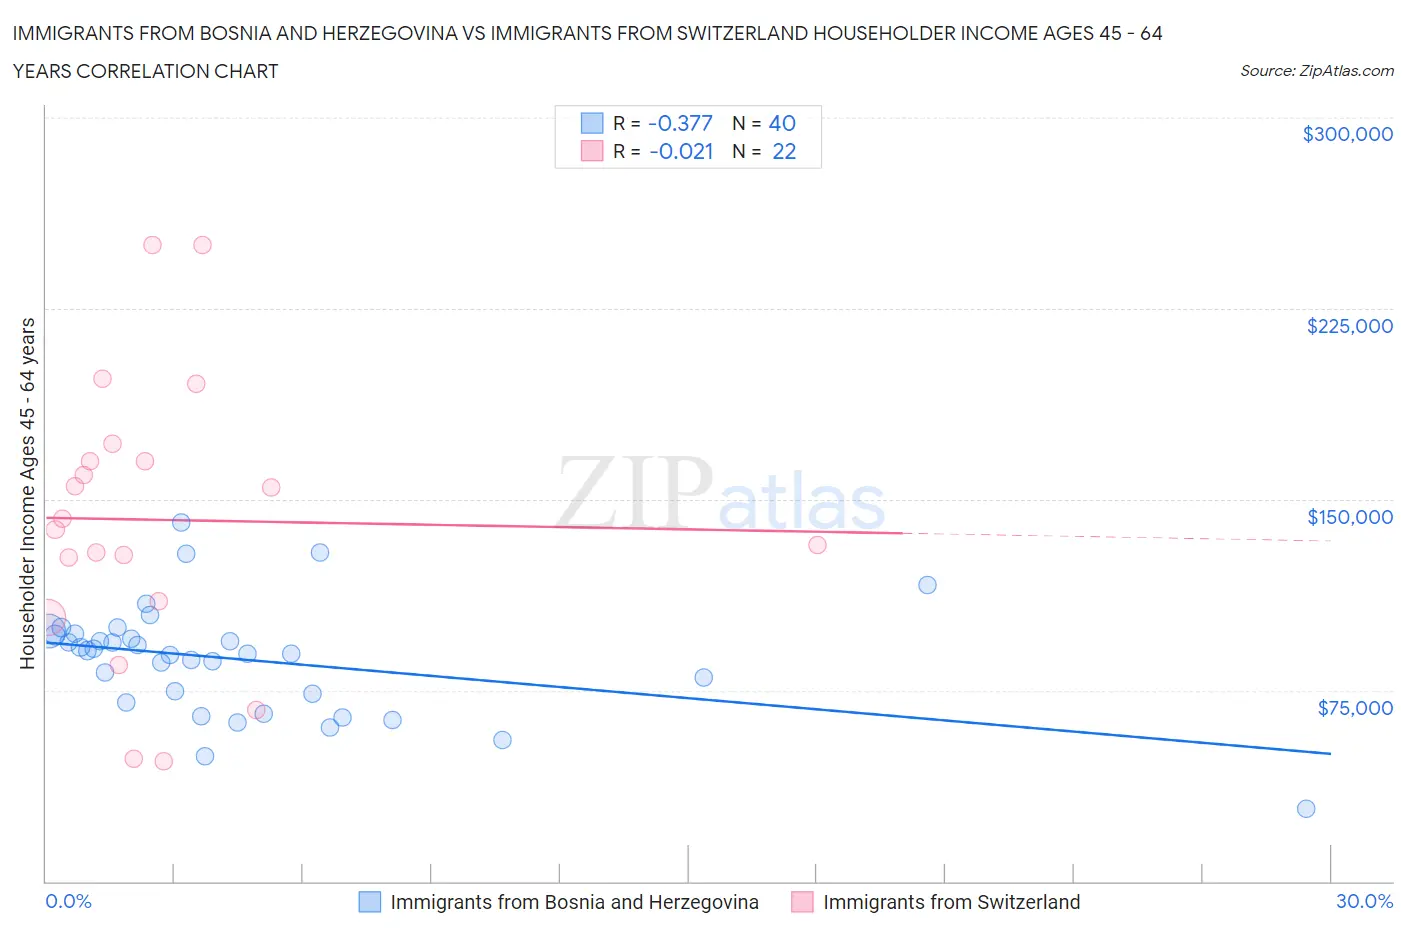 Immigrants from Bosnia and Herzegovina vs Immigrants from Switzerland Householder Income Ages 45 - 64 years